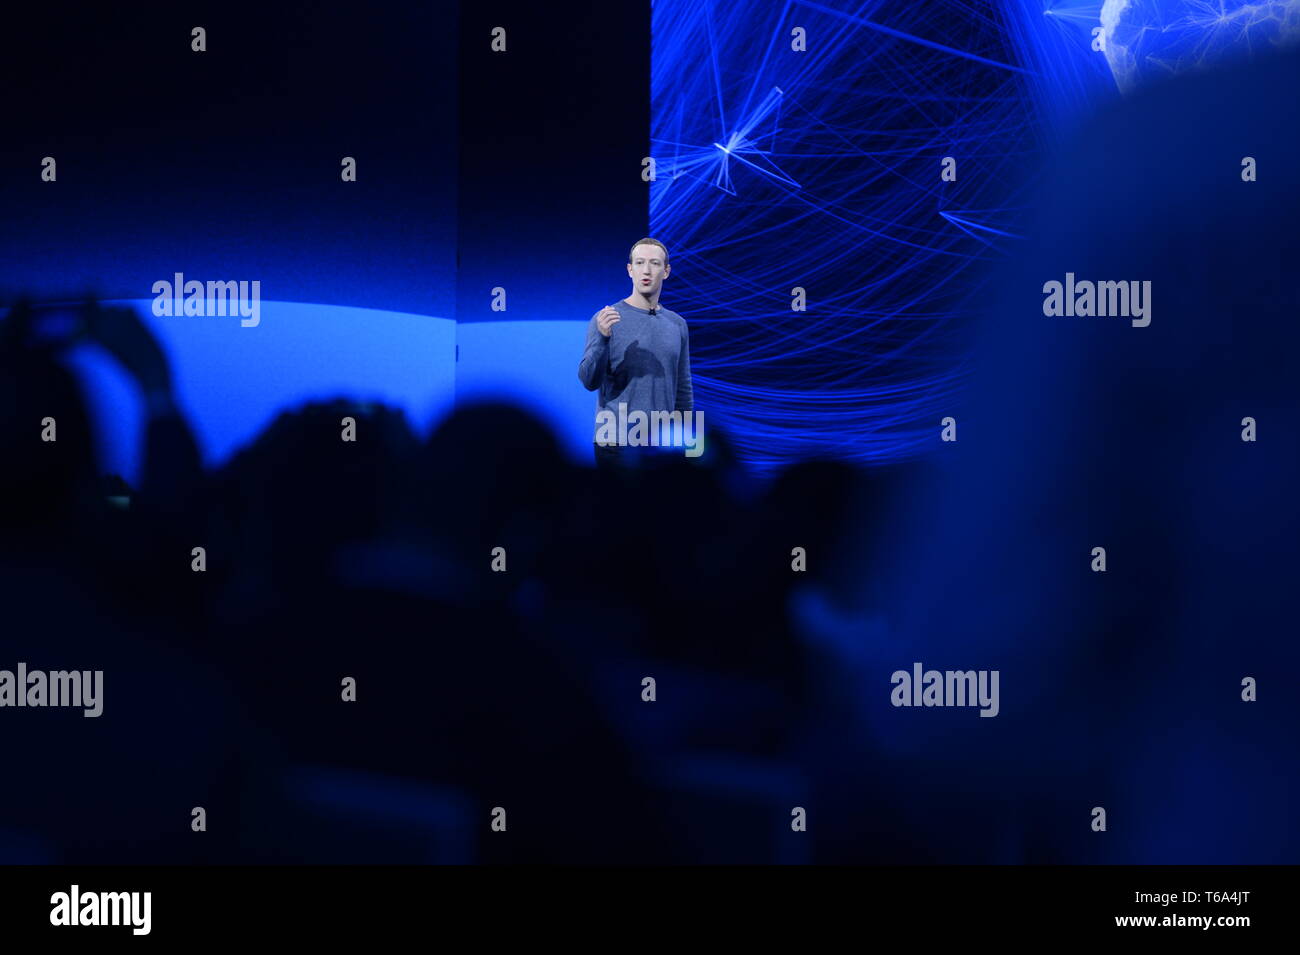 San Jose, USA. 30th Apr, 2019. Facebook CEO Mark Zuckerberg speaks at the F8 developer conference at the McEnery Convention Center. Credit: Andrej Sokolow/dpa/Alamy Live News Stock Photo